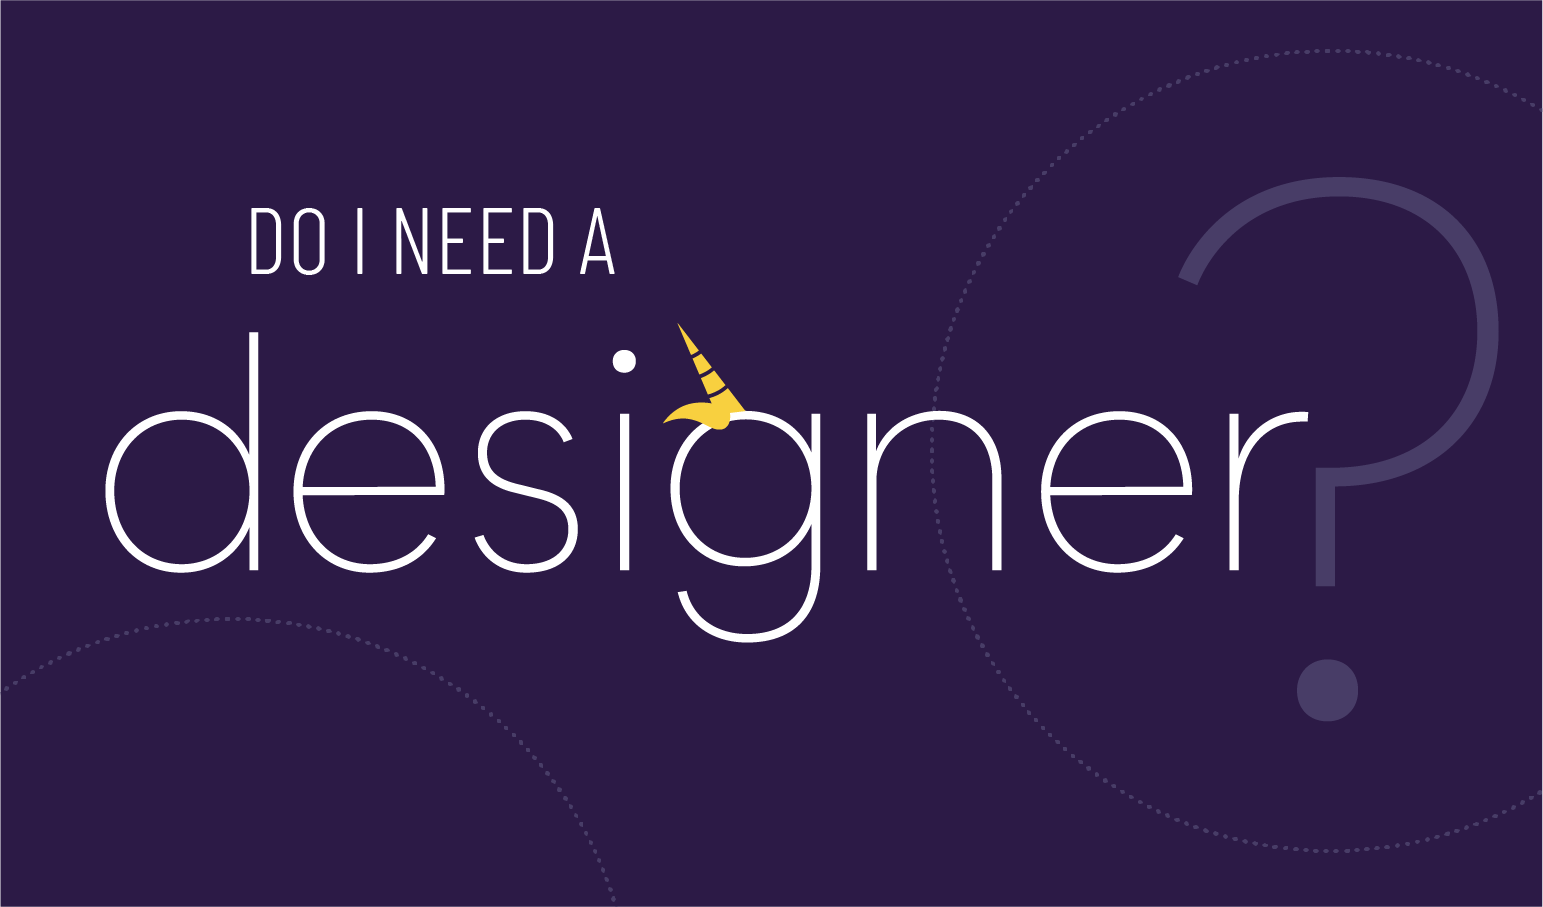 banner that says "Do I need a designer?"